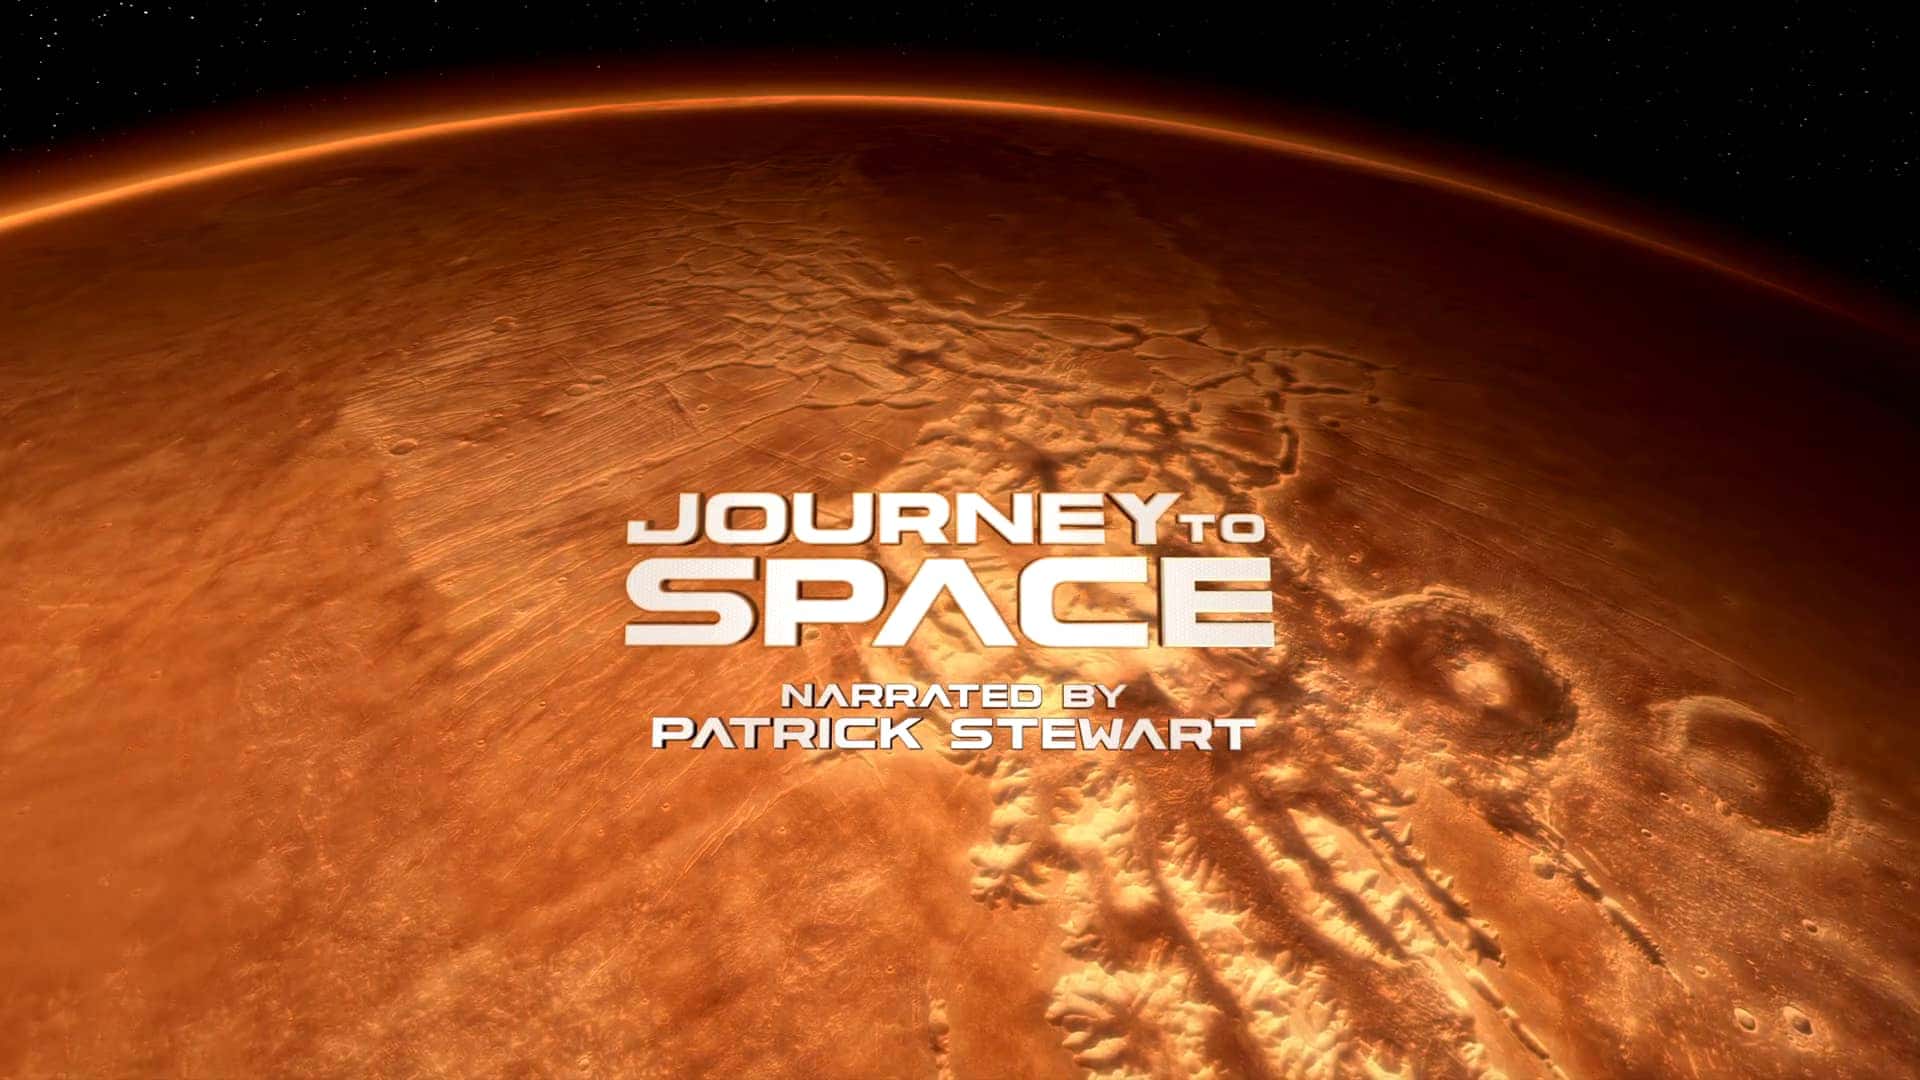 Journey to Space 4K 2015 big poster